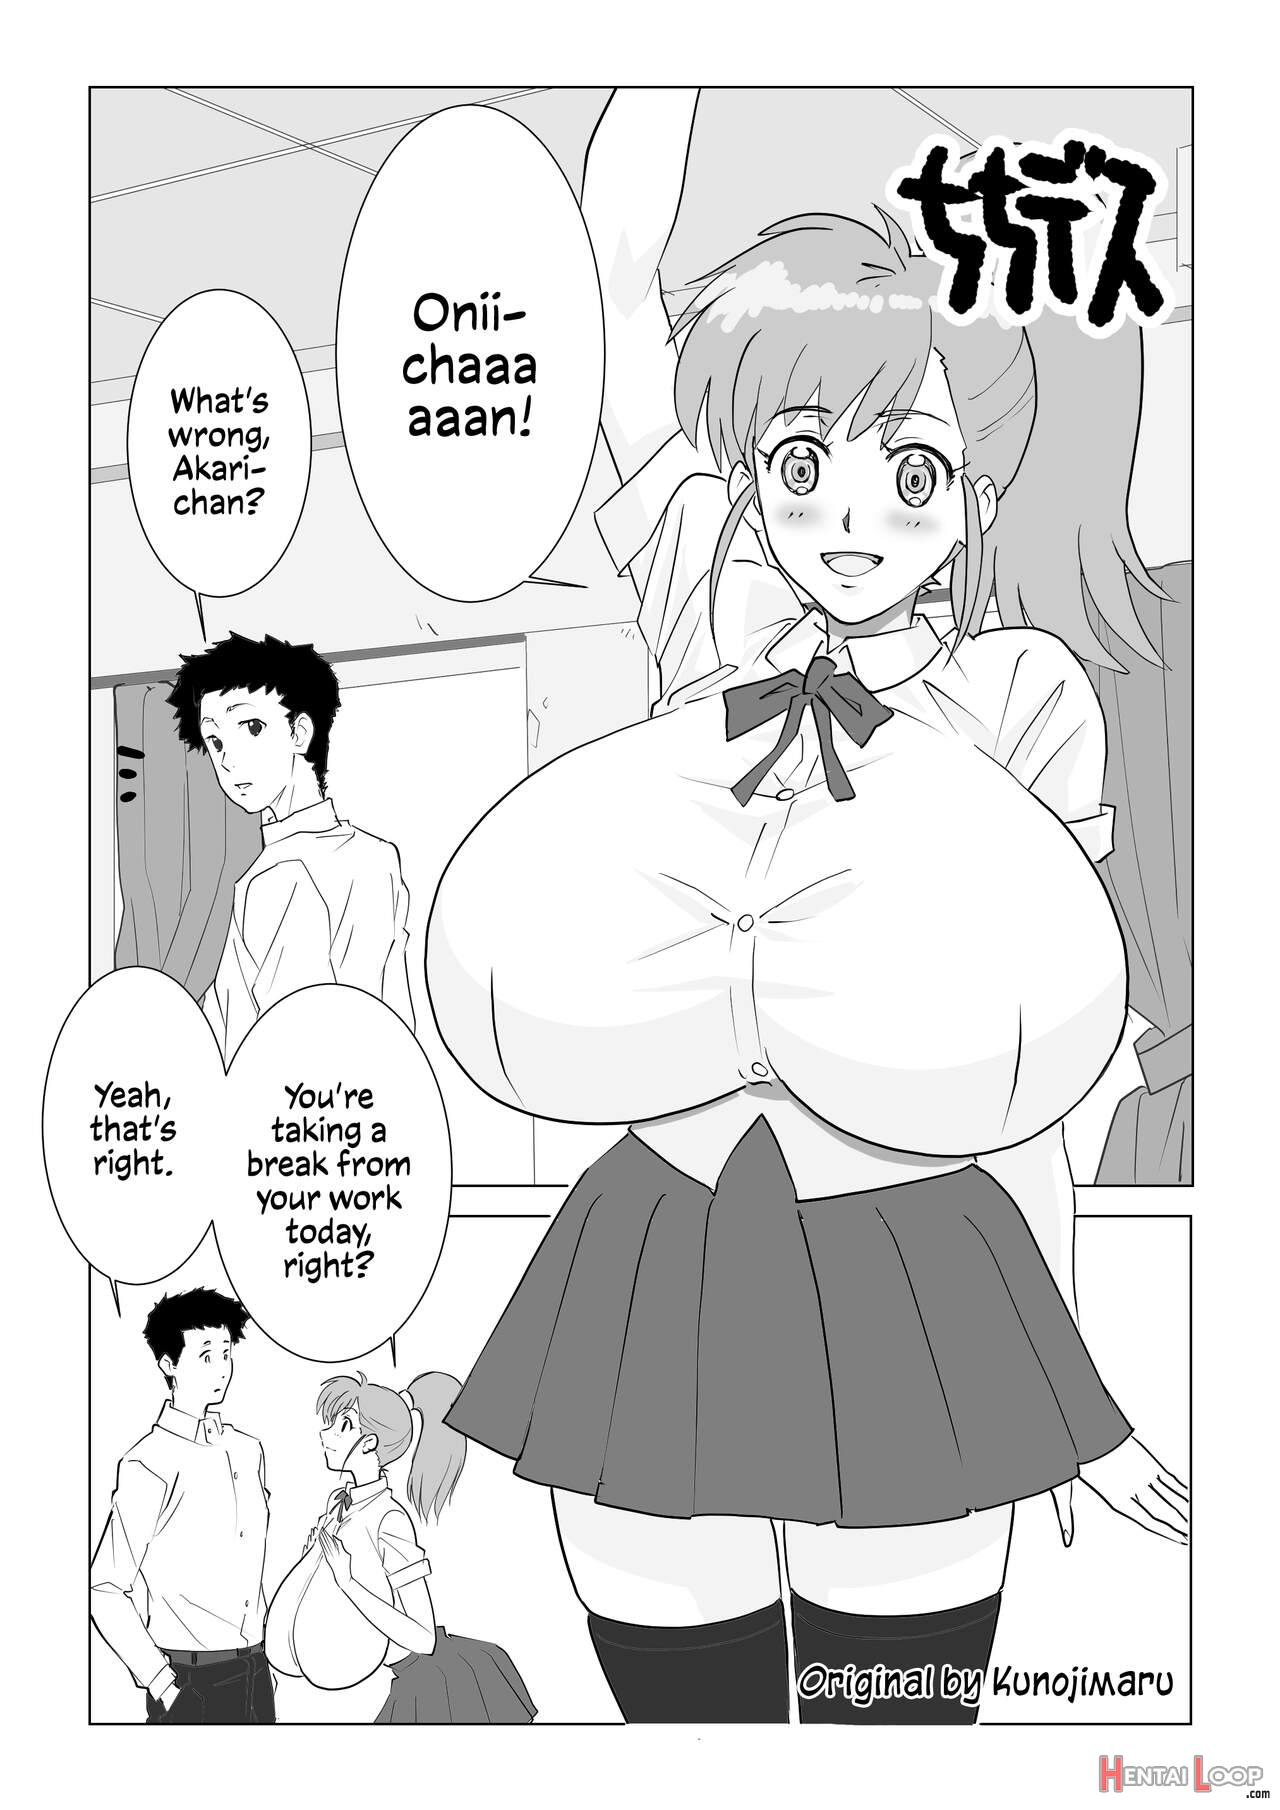 Boobs page 1